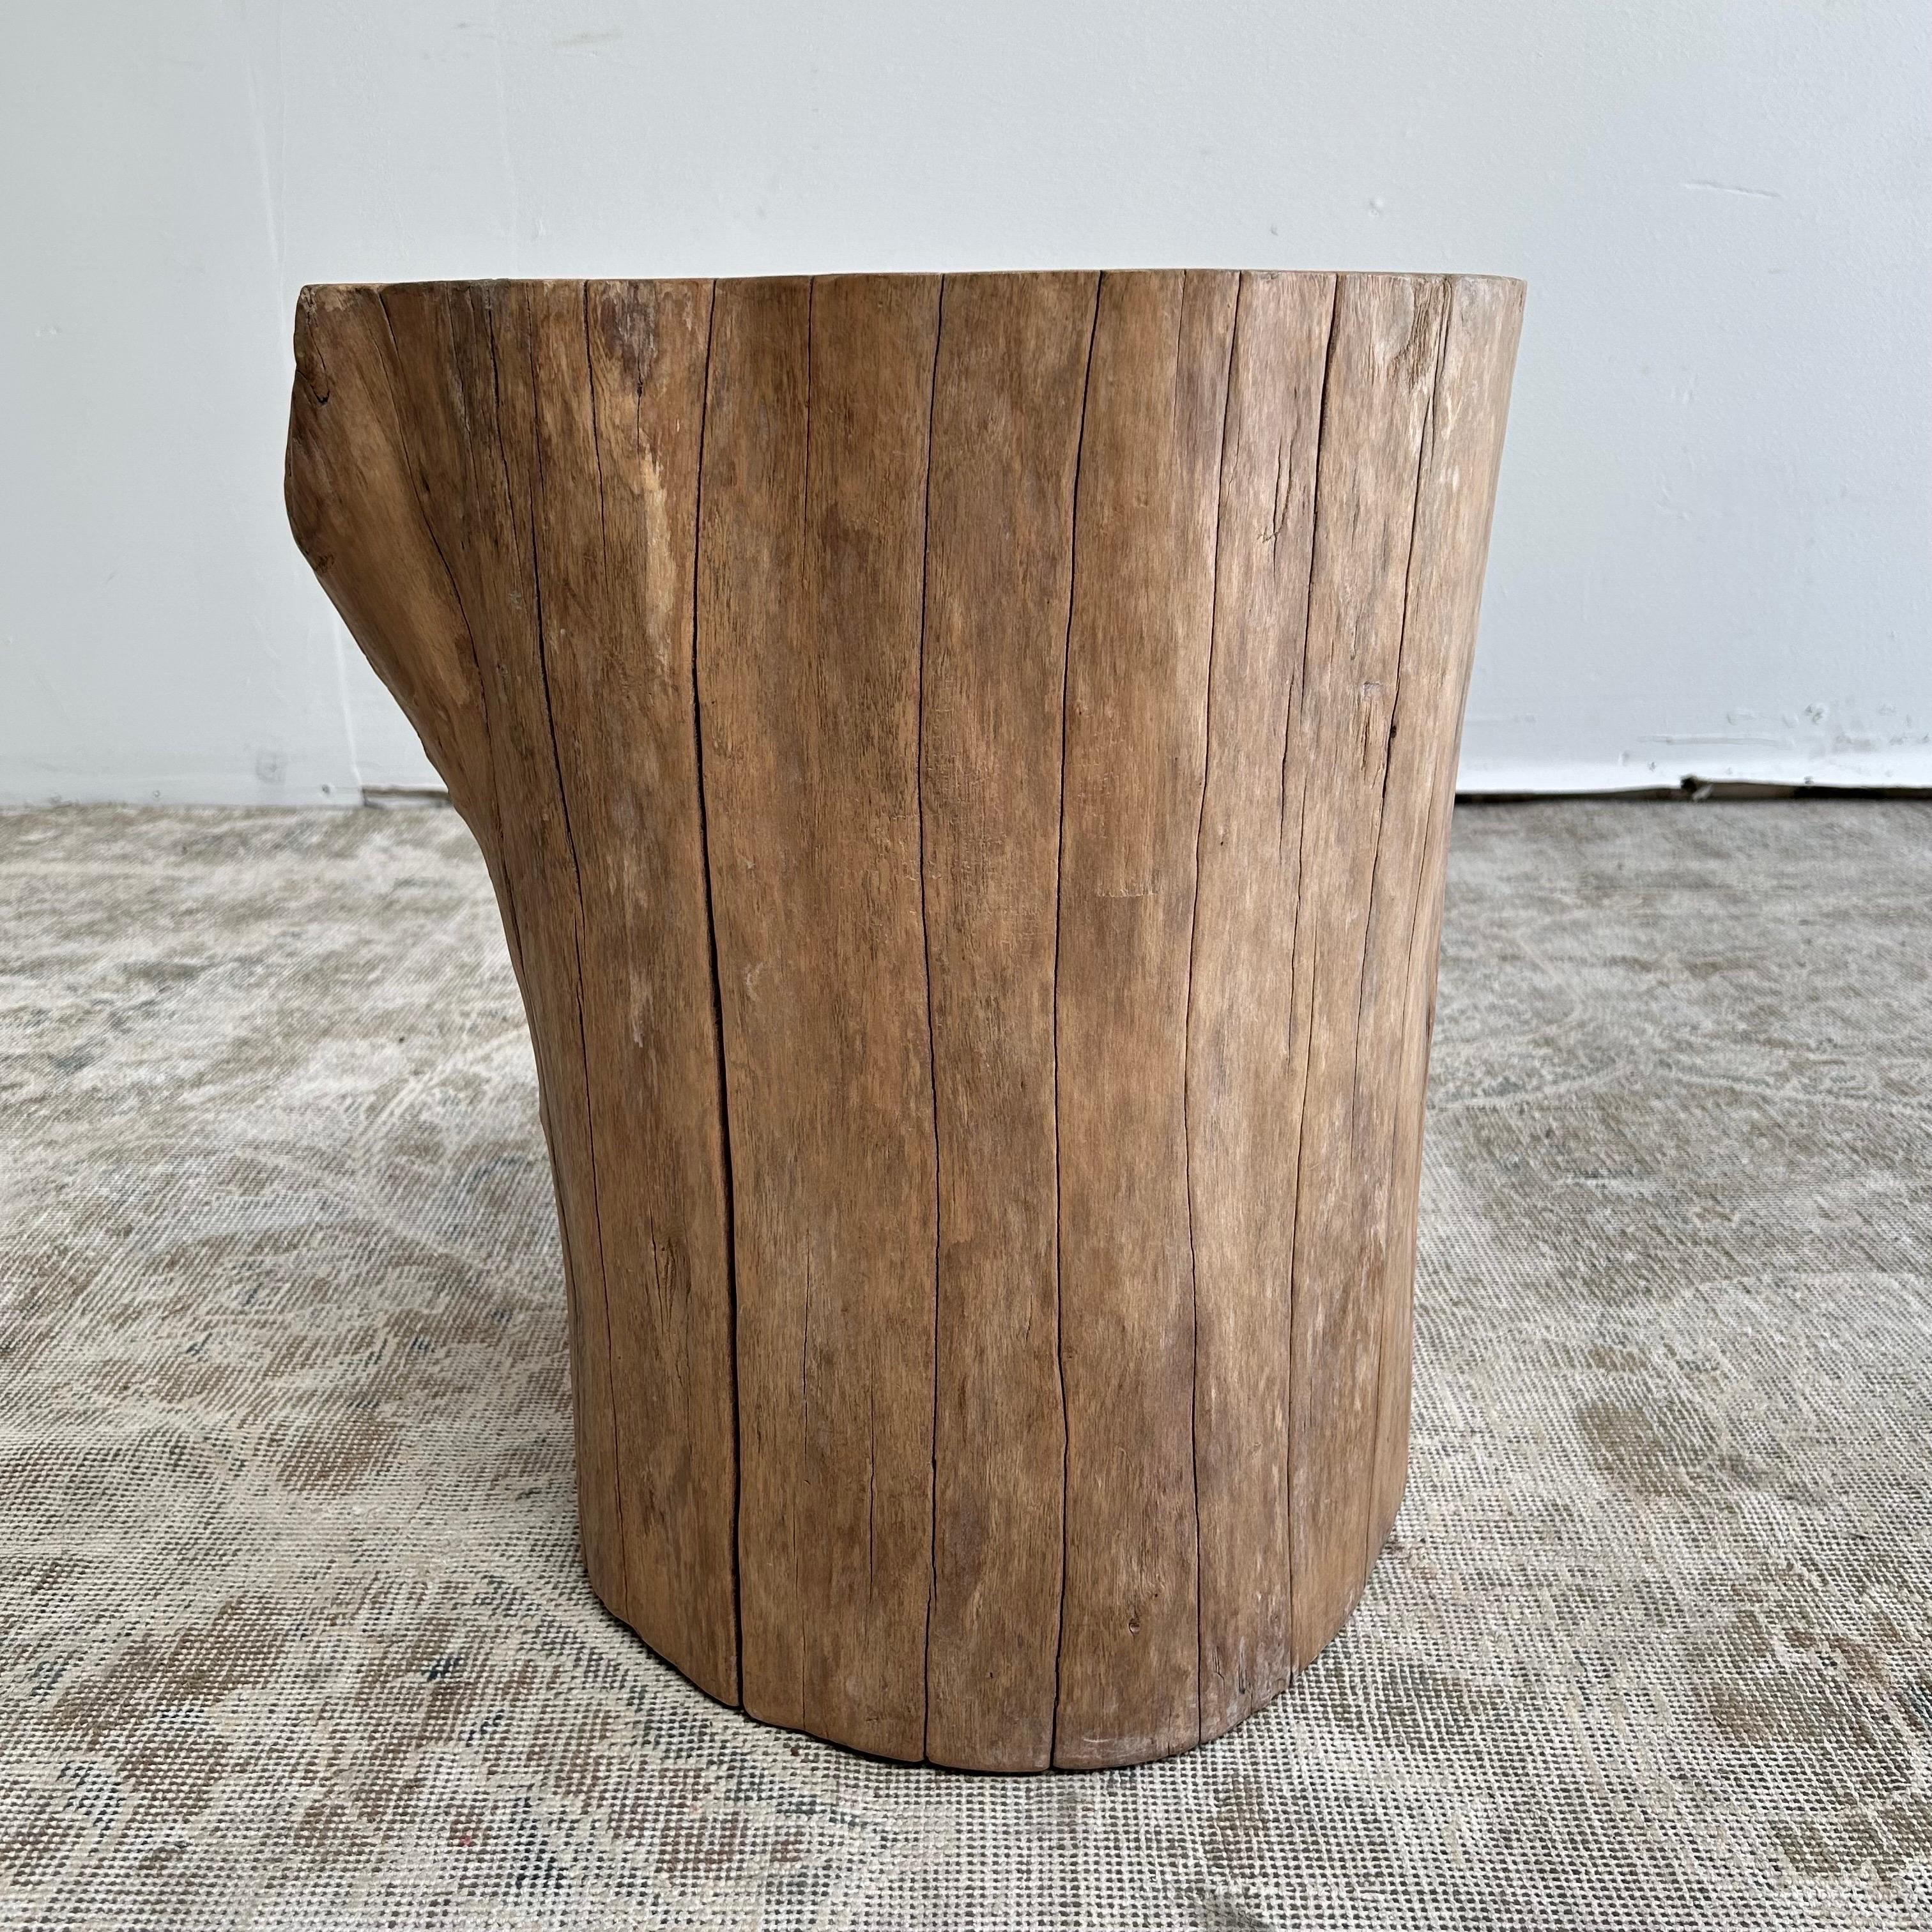 Contemporary Natural Wood Stump Side Table or Stool